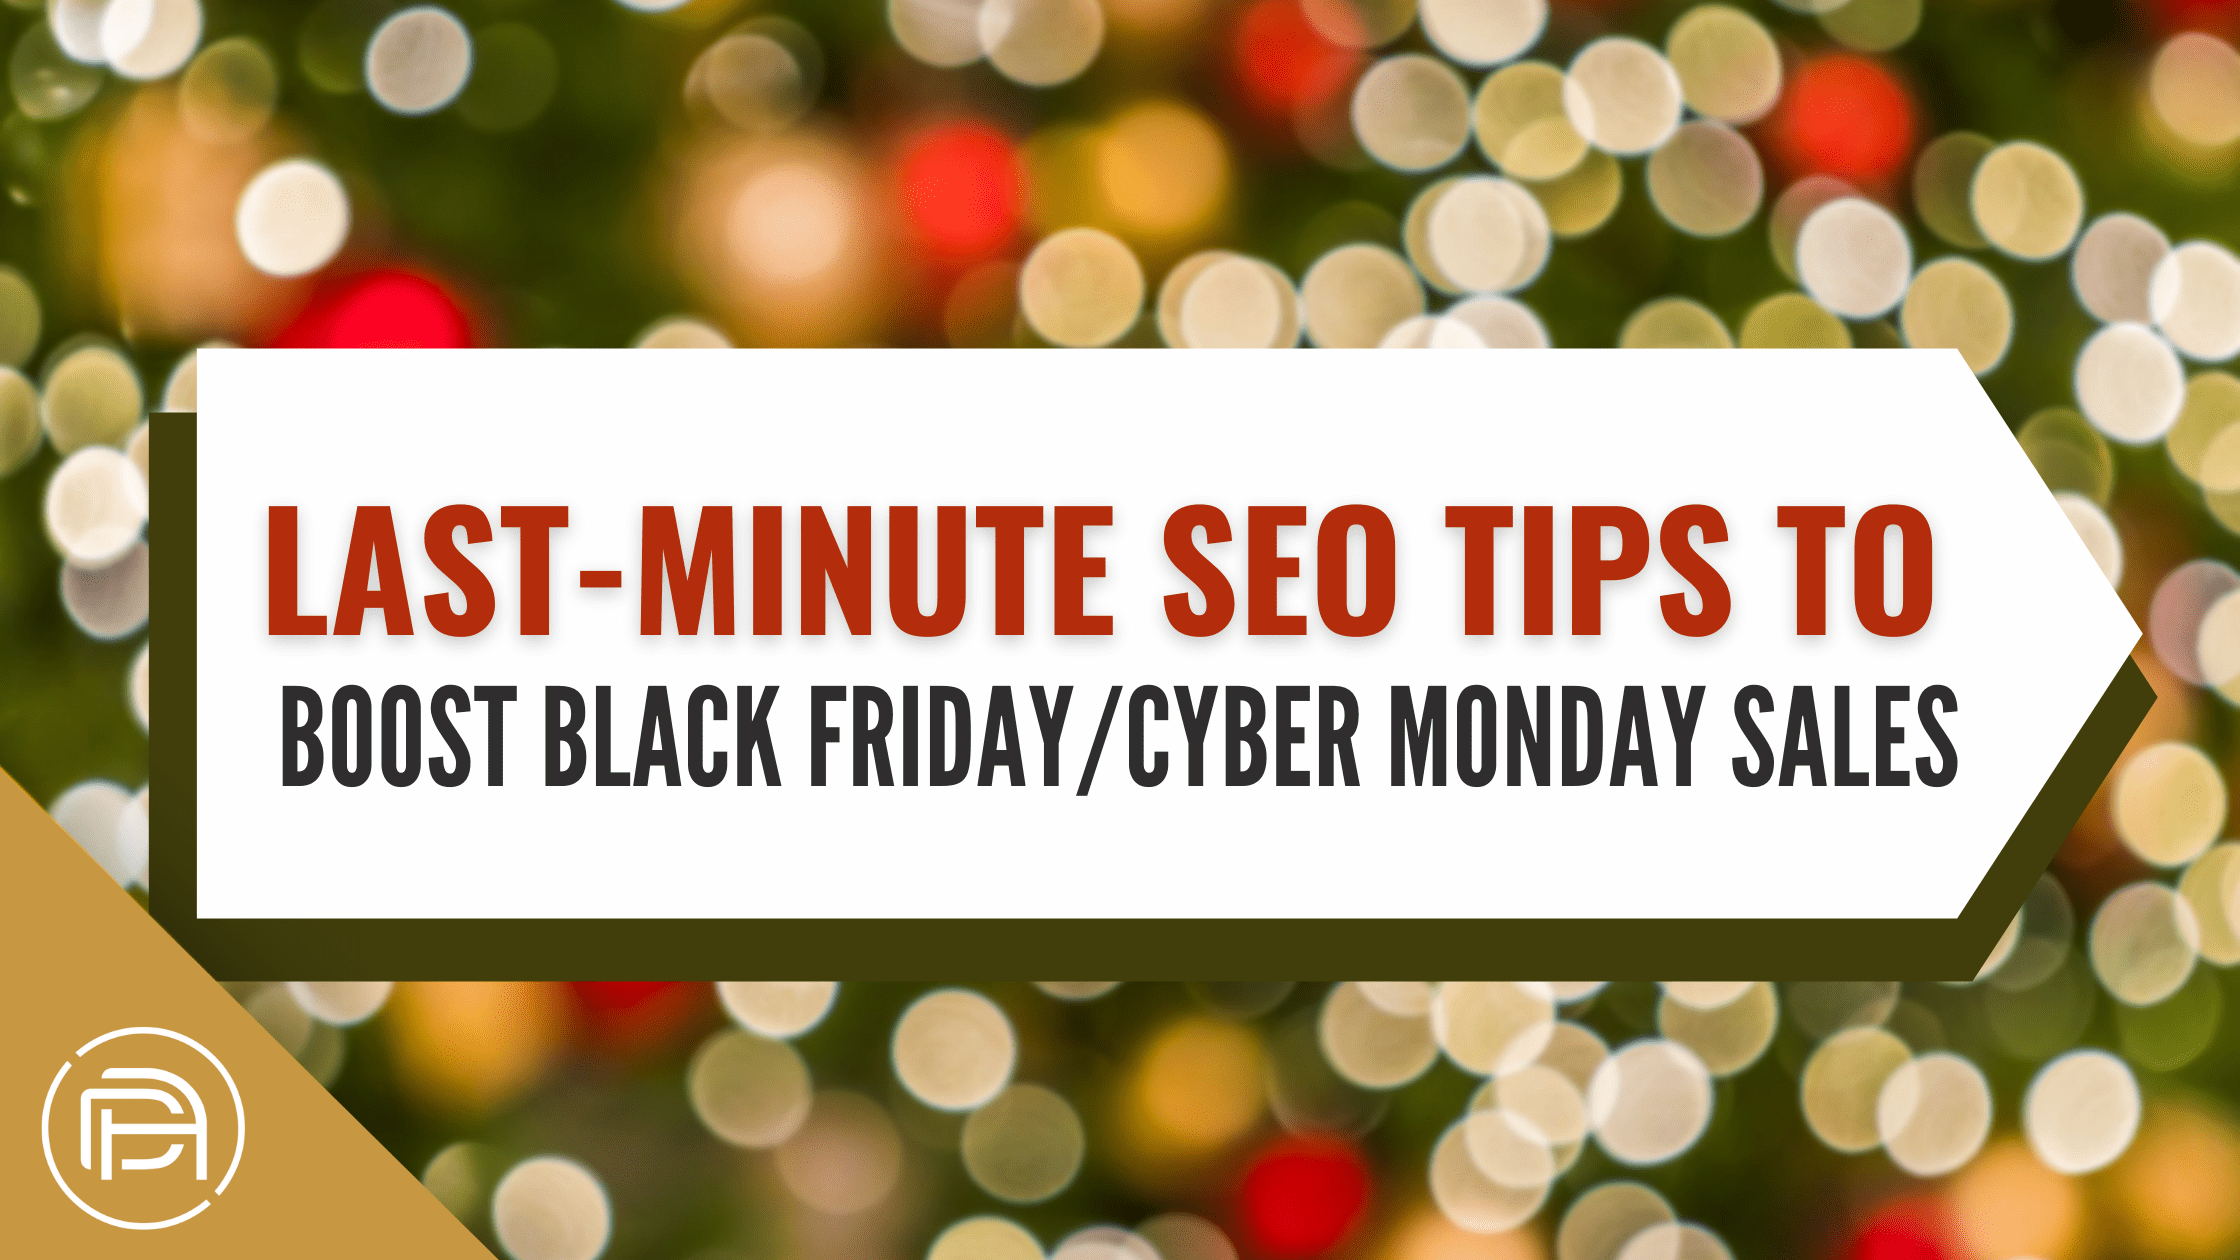 Last-Minute SEO Tips to Boost Black Friday/Cyber Monday Sales